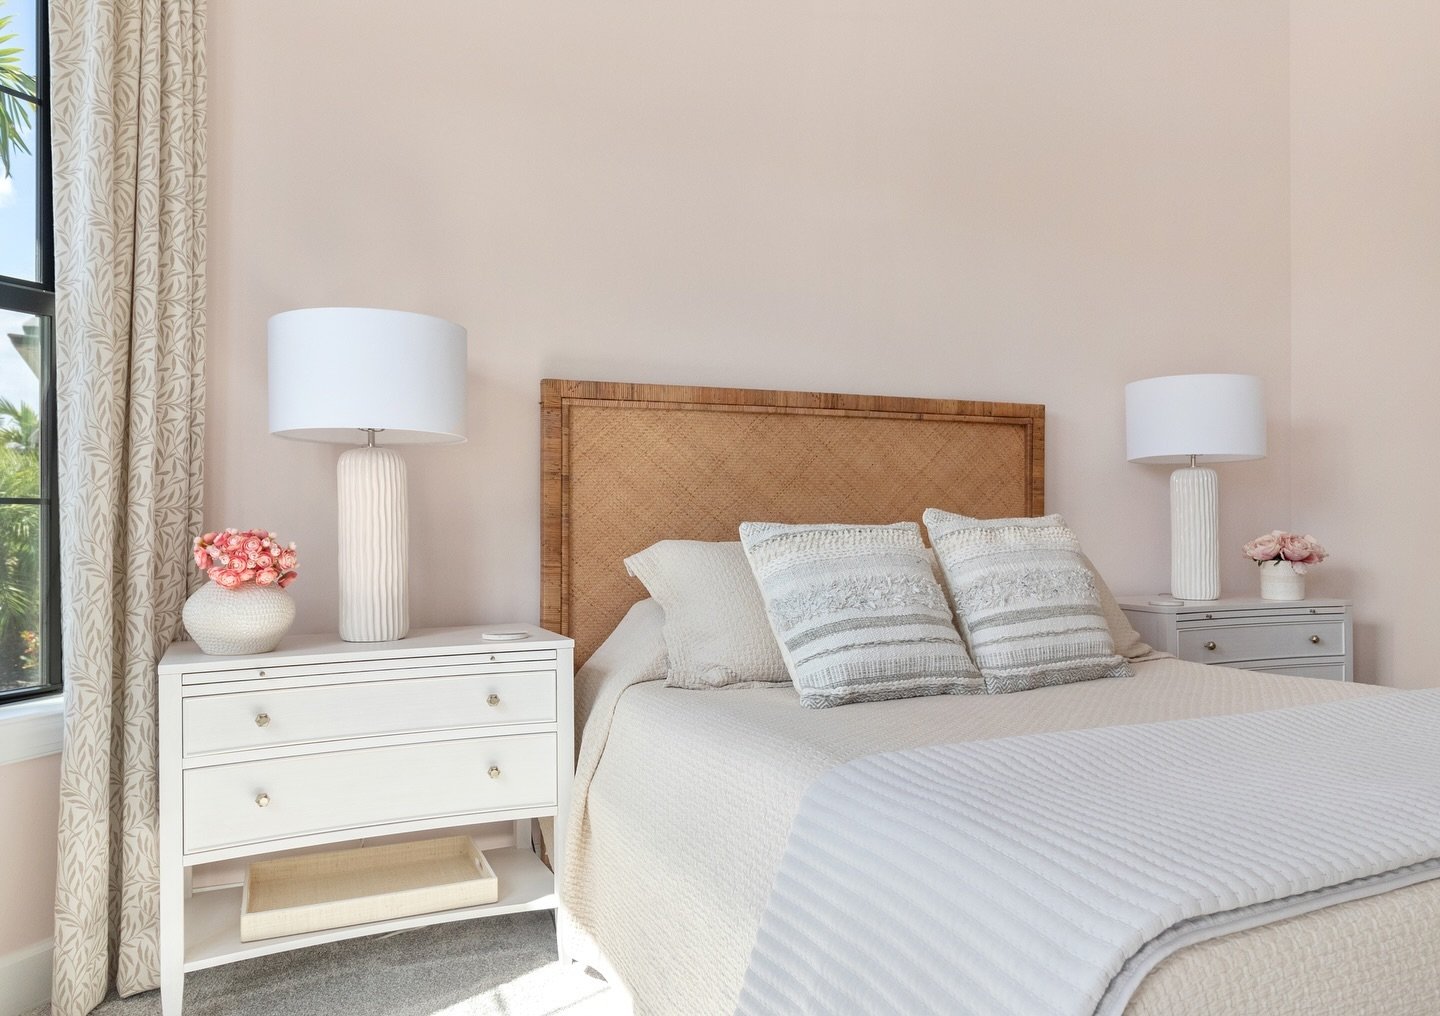 A guest bedroom that welcomes your guests. We love this design's soft textures, patterns, and color scheme. See more of this project @sandraasdourianinteriors photography @jsmolinaphotography  #personalizeddesign #DesignAspirations #StylePreferences 